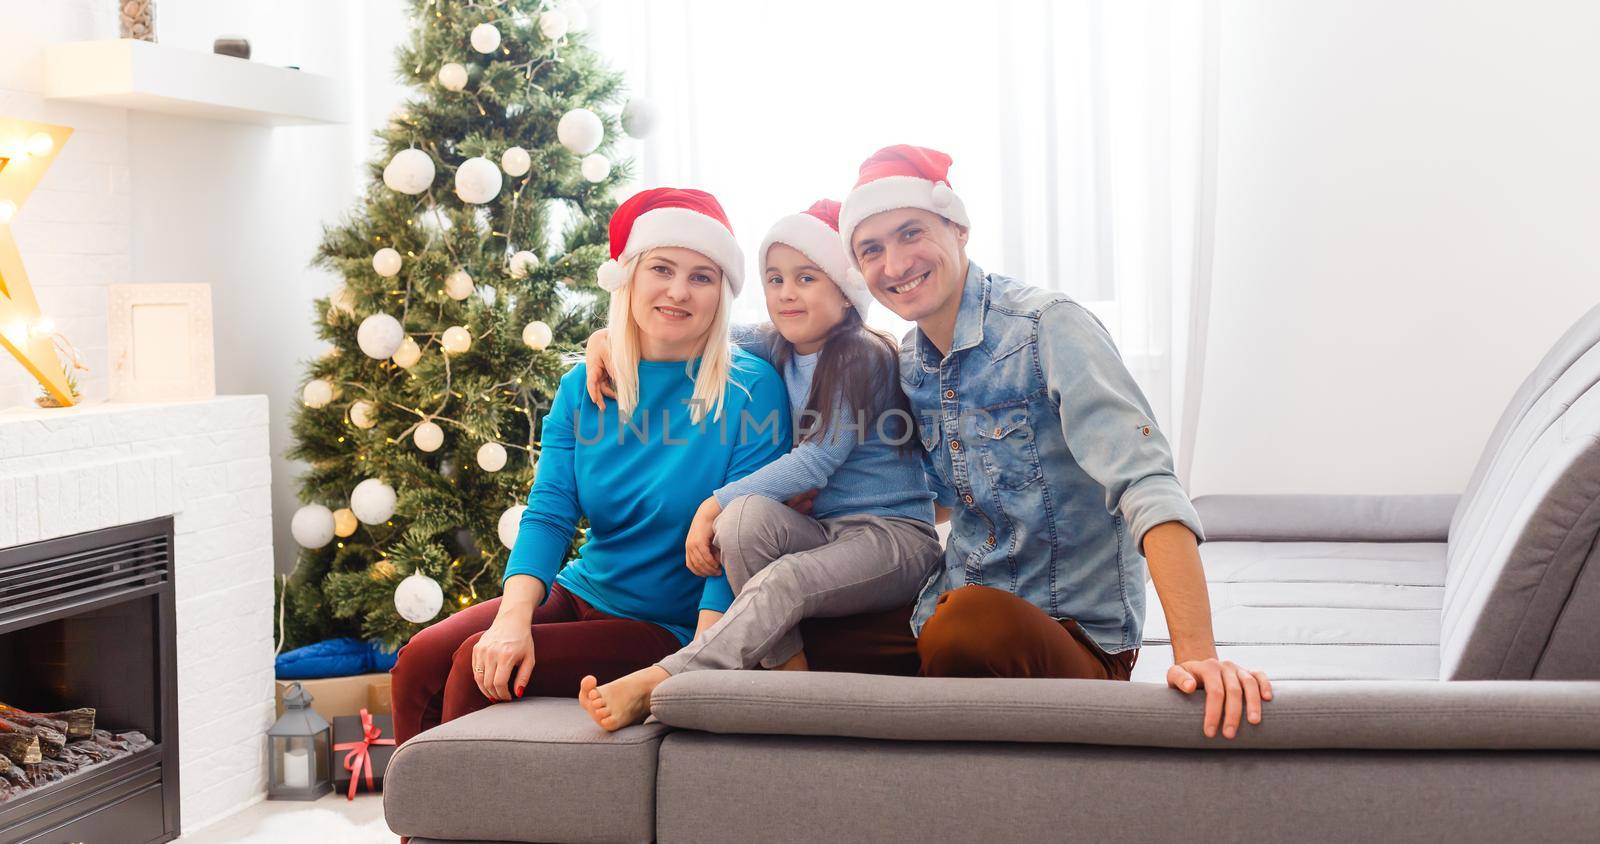 Young family on Christmas morning exchanging presents and enjoying their time together.